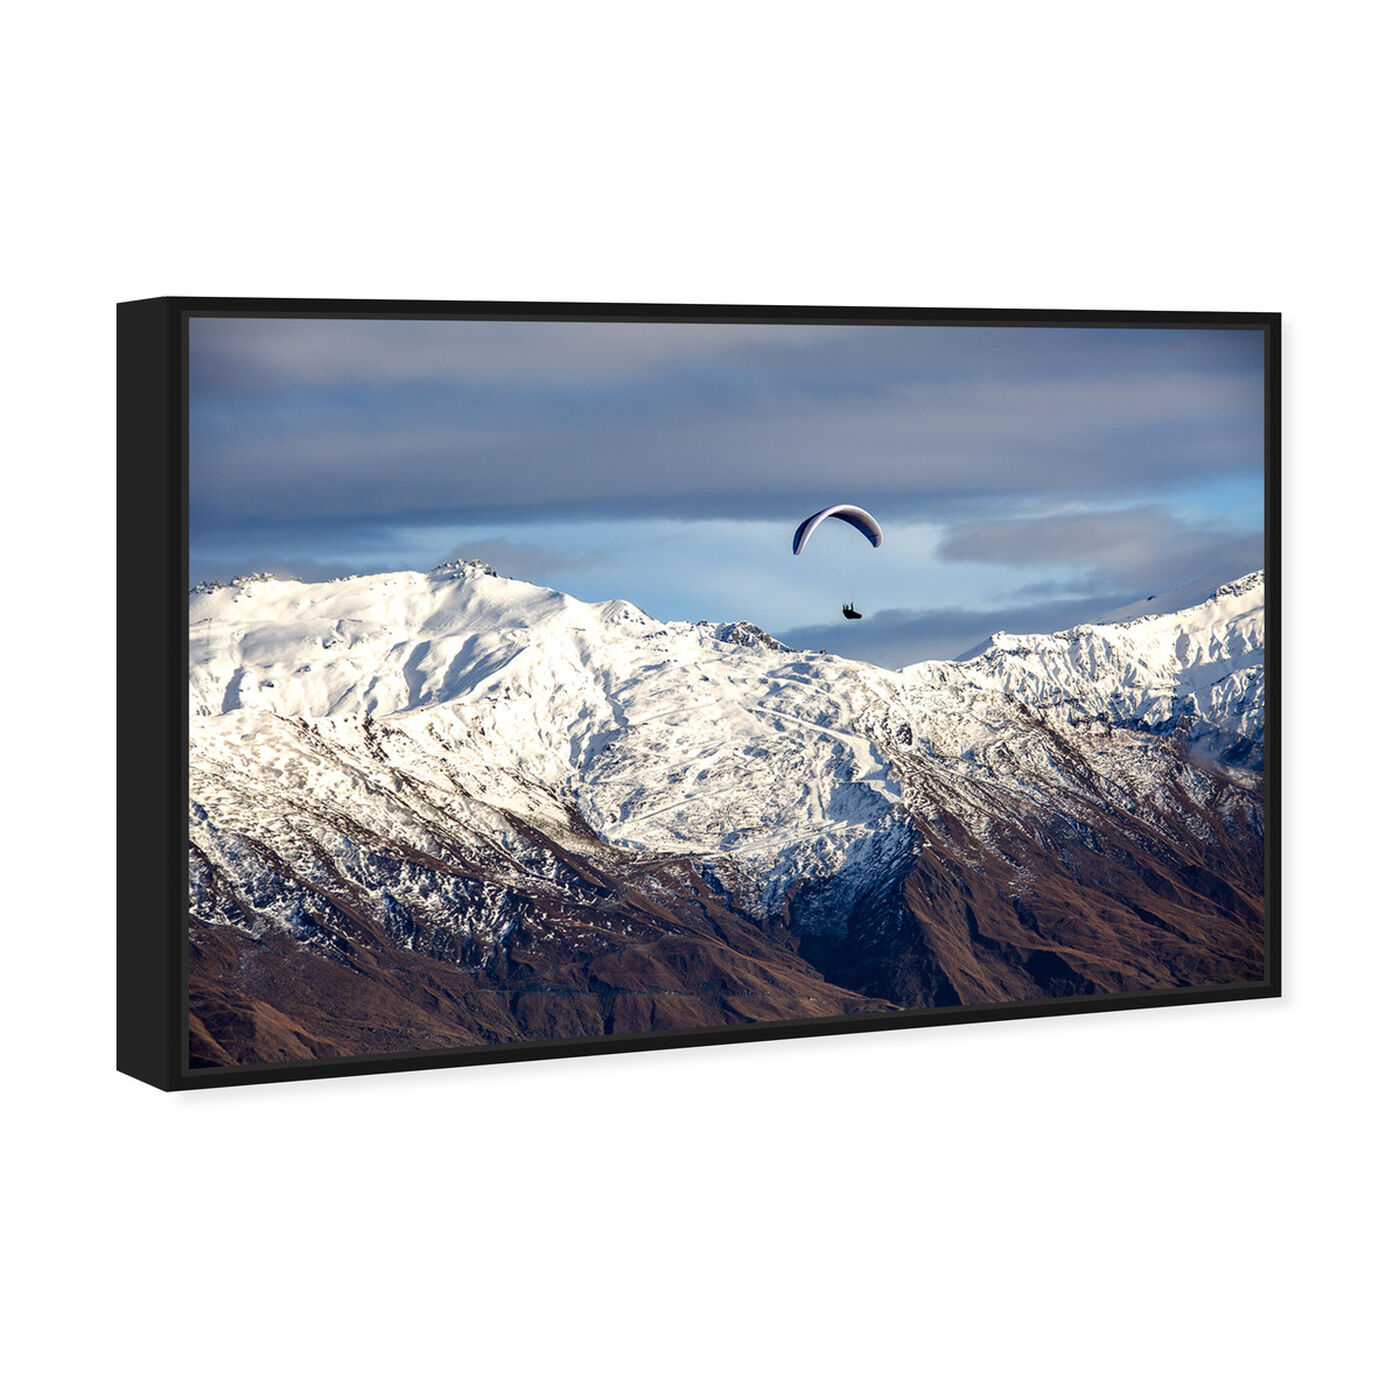 Angled view of Curro Cardenal - Paragliding Free featuring nature and landscape and mountains art.